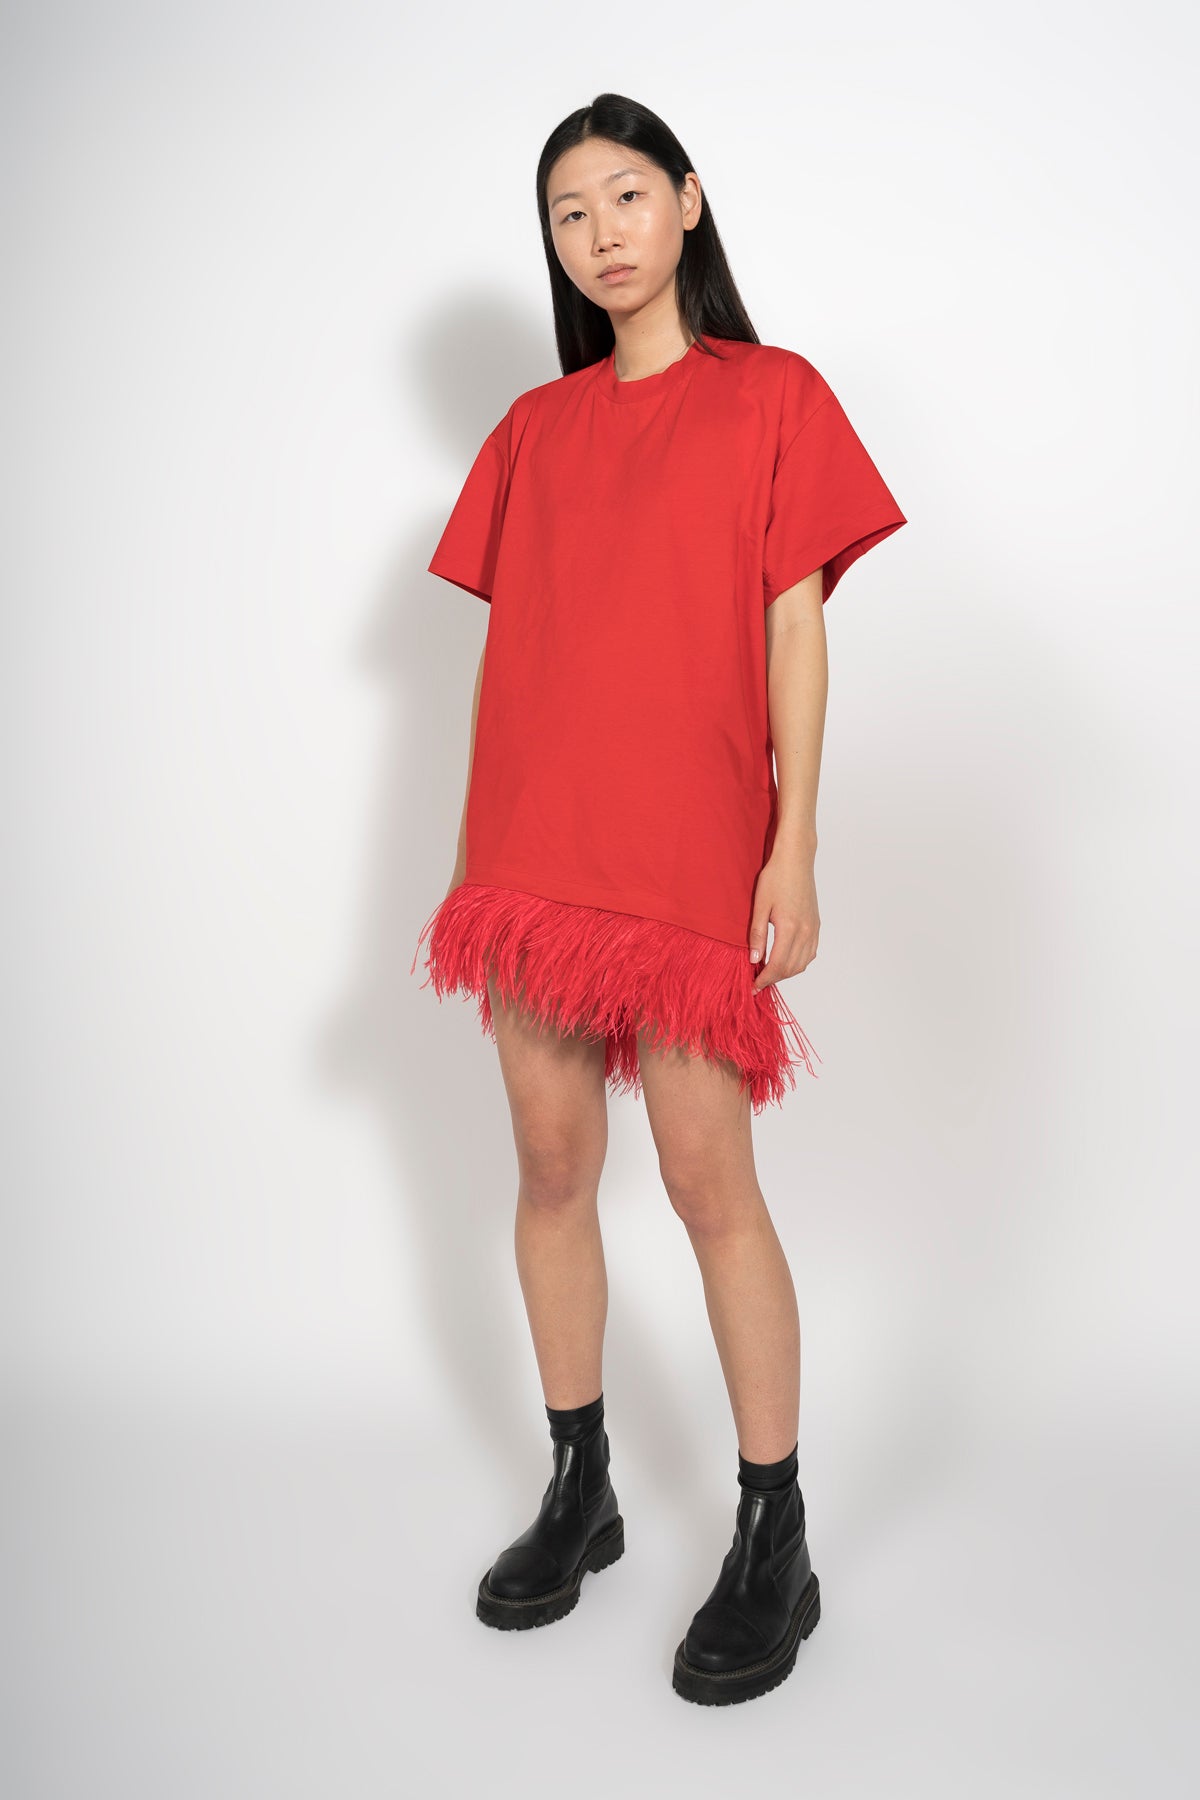 FEATHER HEM TOP IN RED - marques-almeida